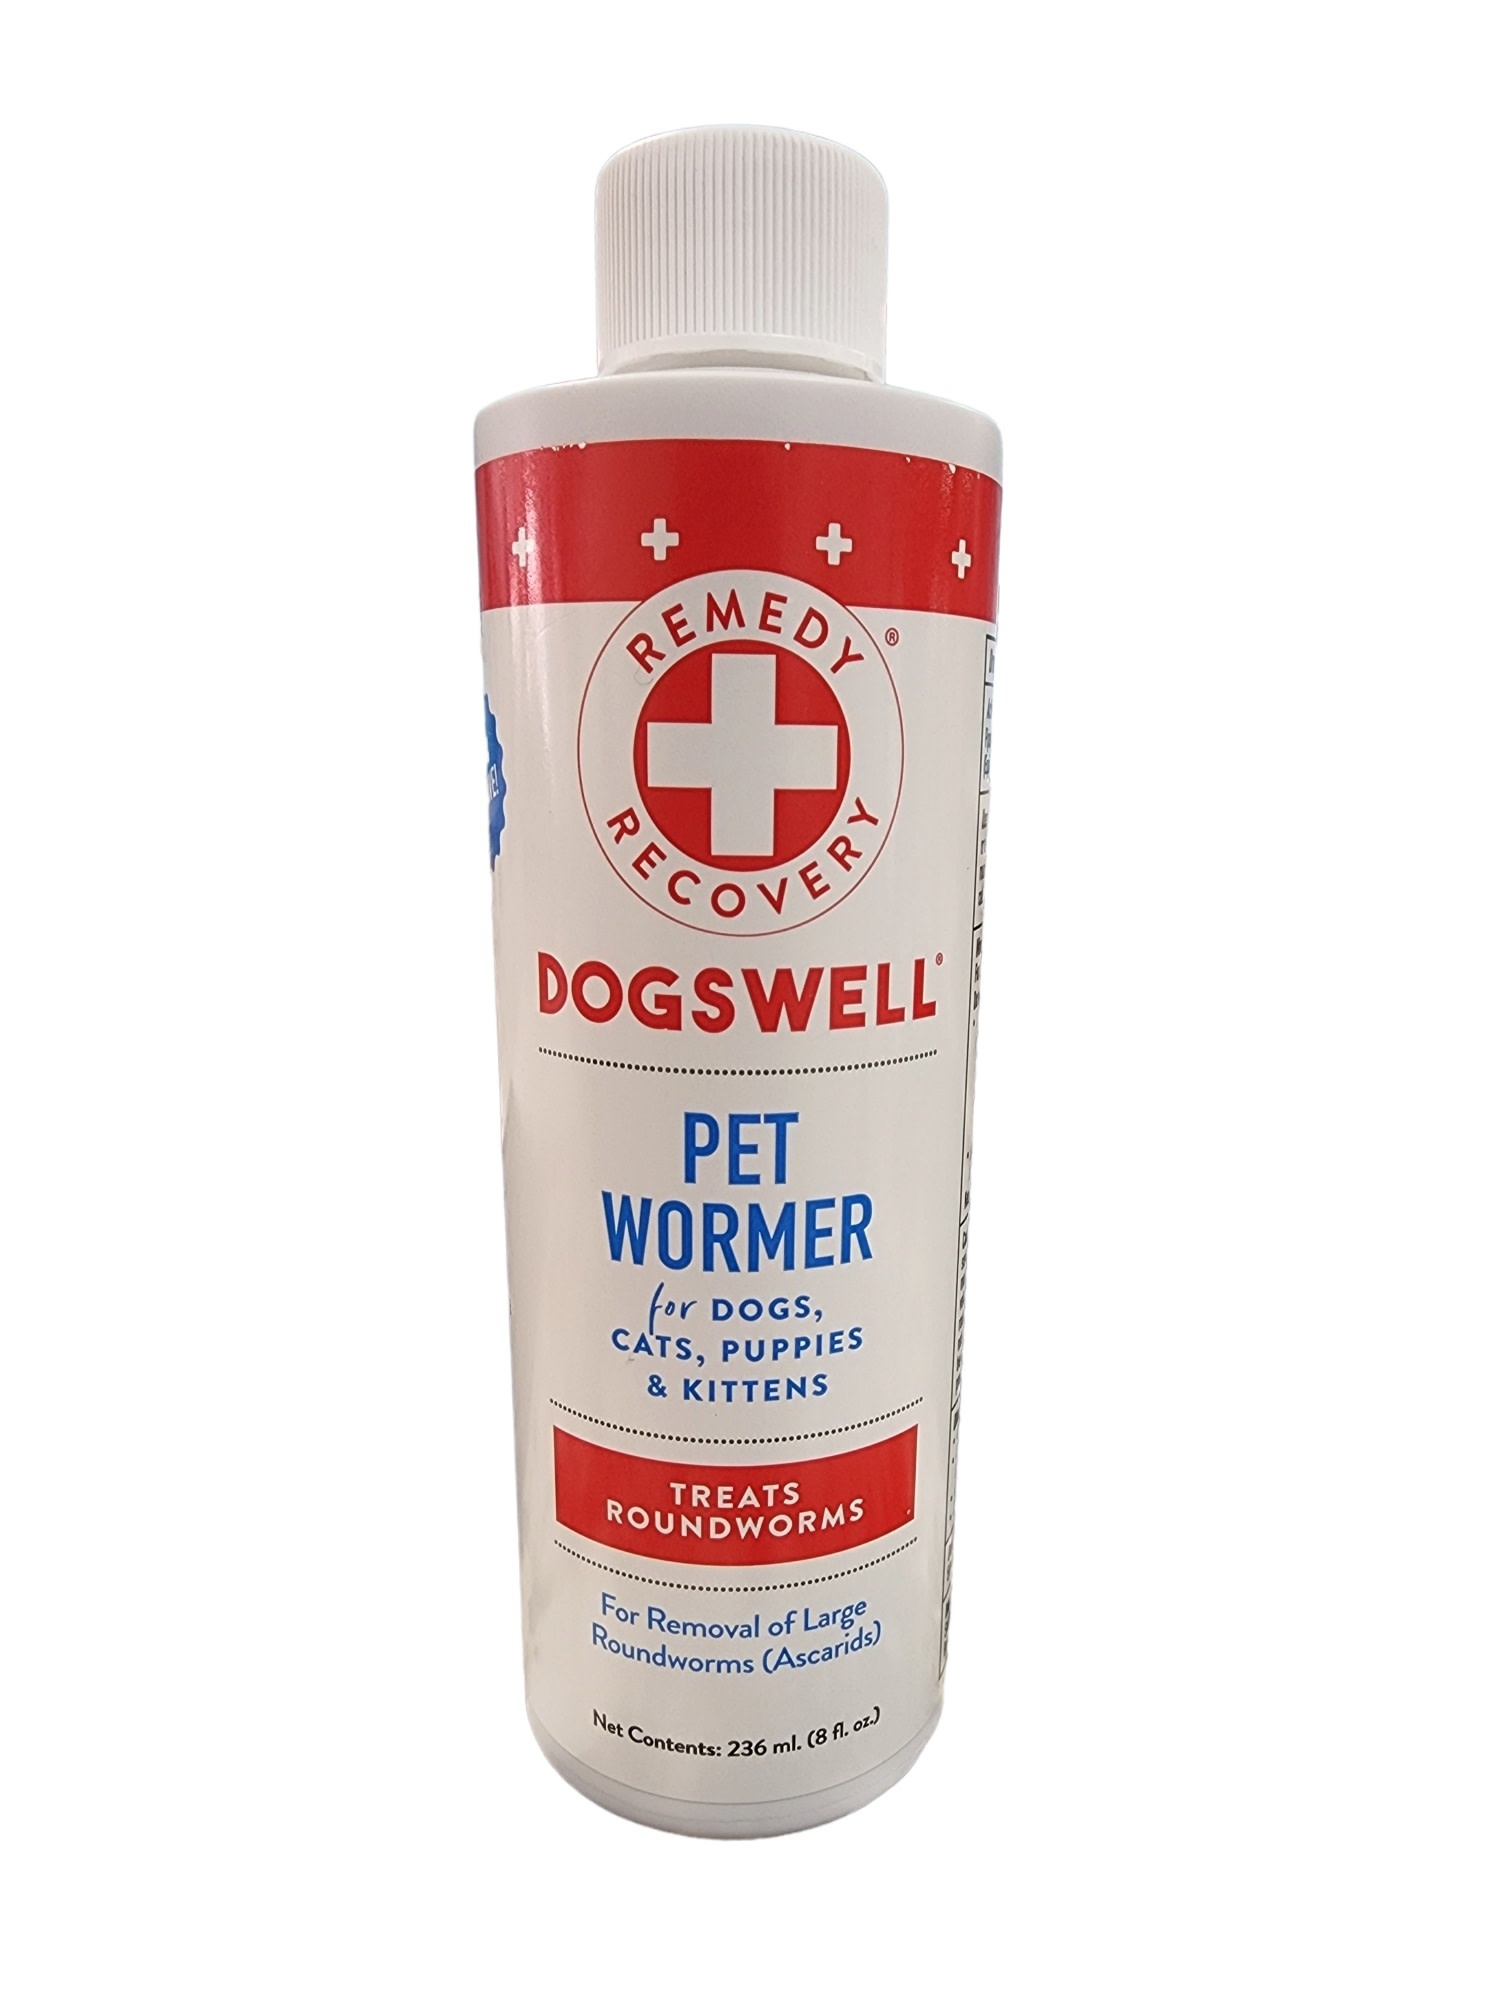 Dogswell Remedy+Recovery Liquid Bandage For Dogs, 4 fl. oz.